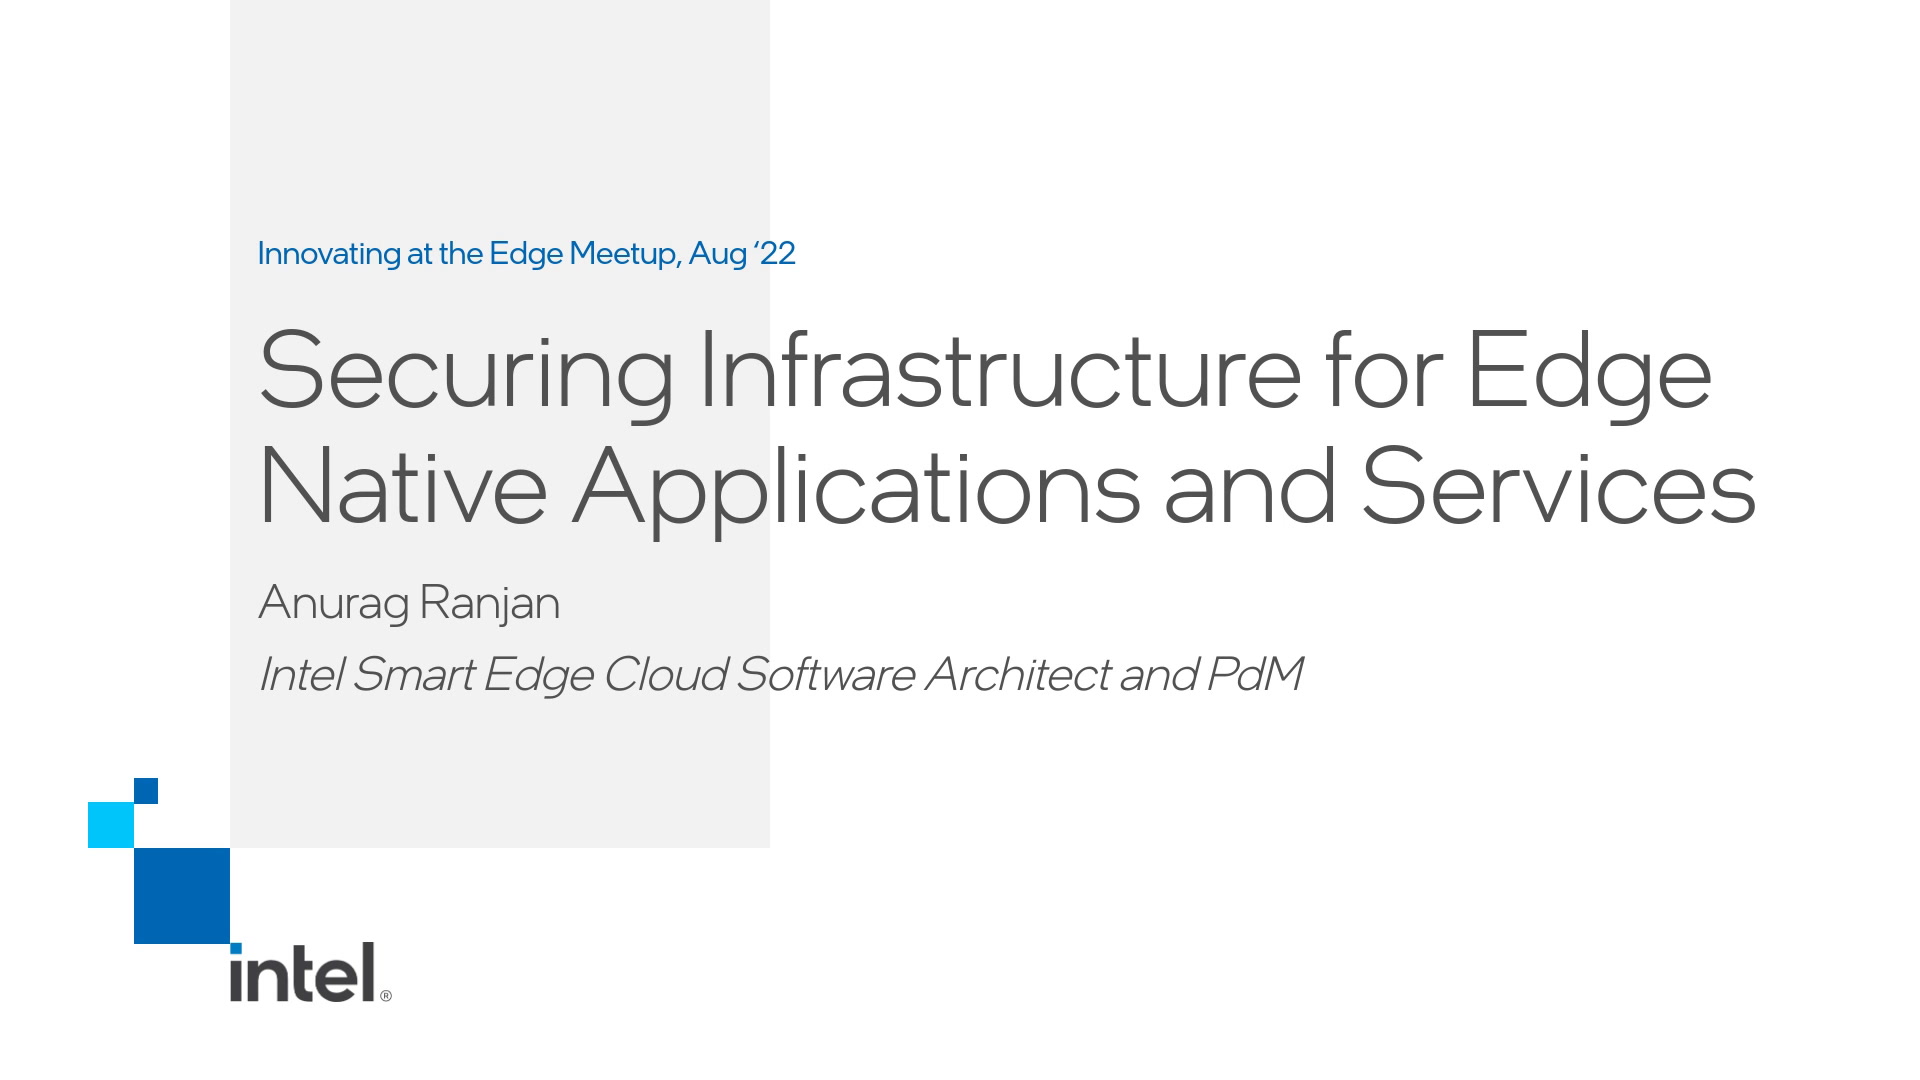 Securing the Infrastructure for Edge Native Applications and Services